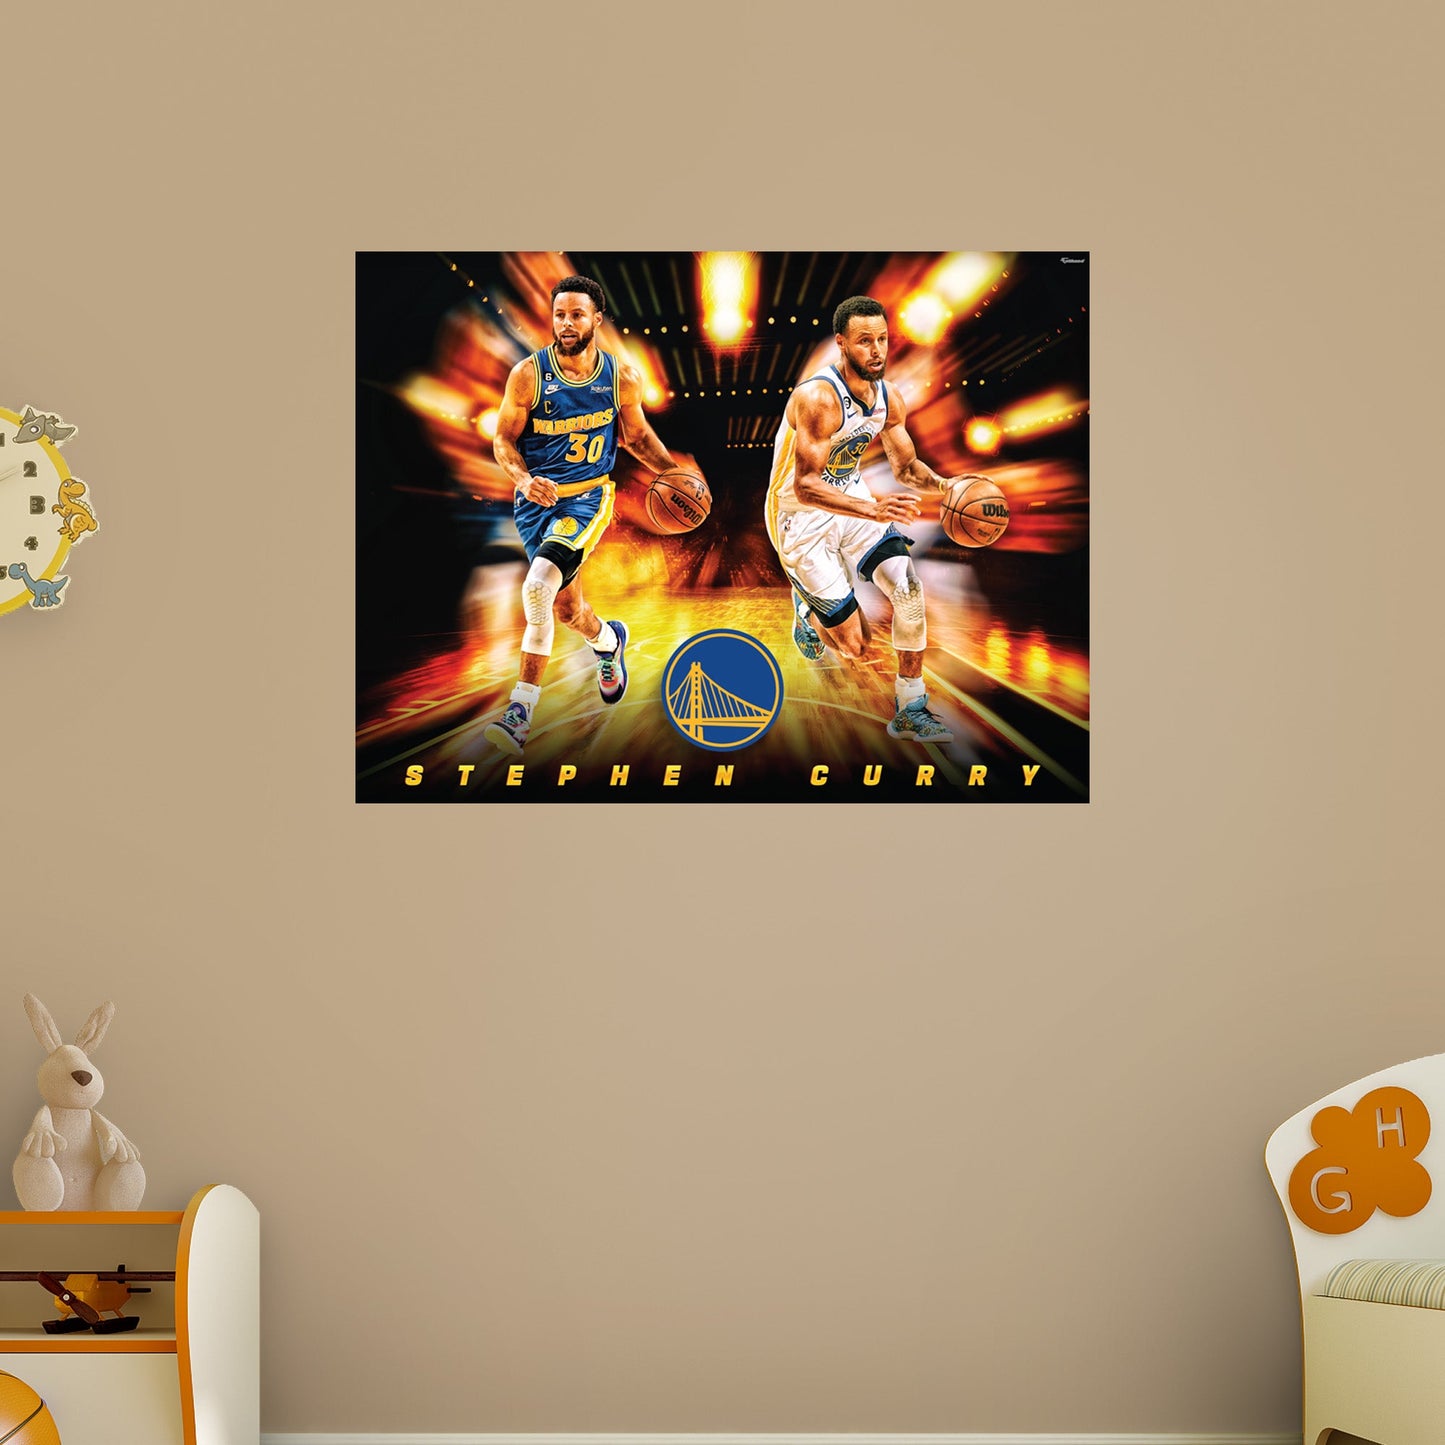 Golden State Warriors: Stephen Curry Icon Poster - Officially Licensed NBA Removable Adhesive Decal